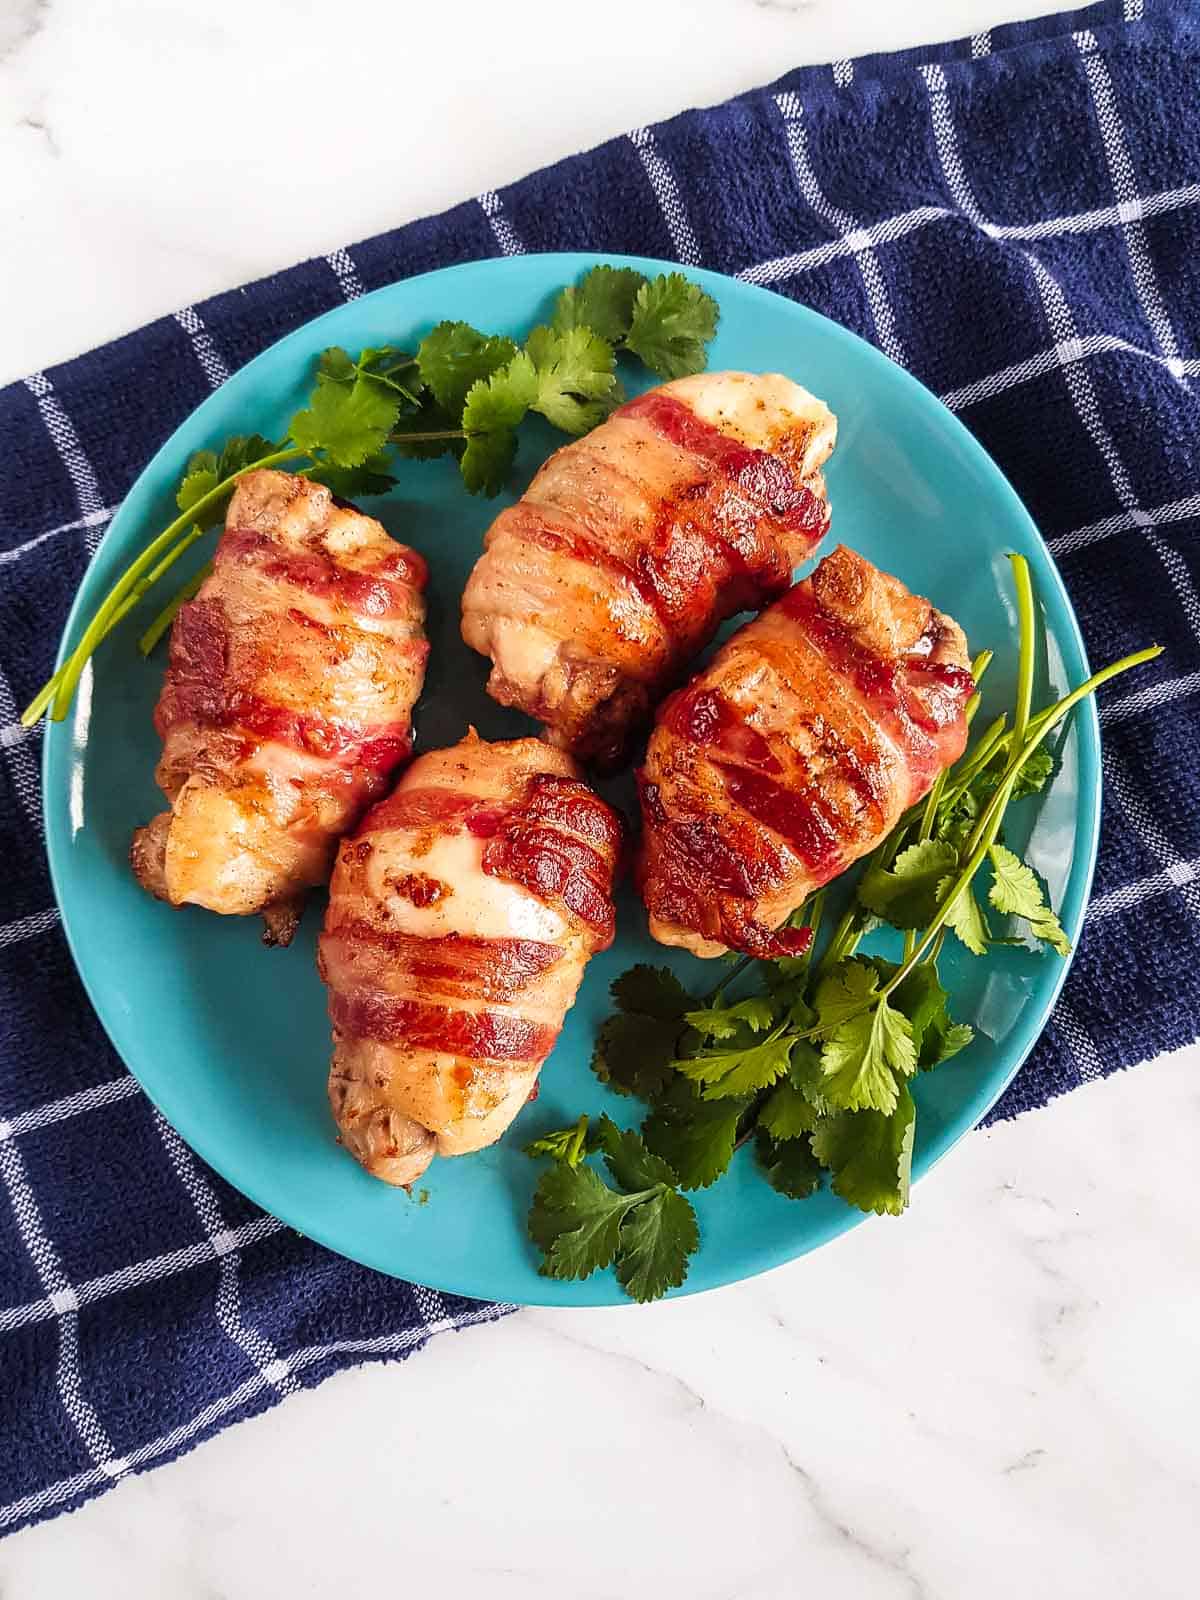 A plate with four bacon wrapped chicken thighs.